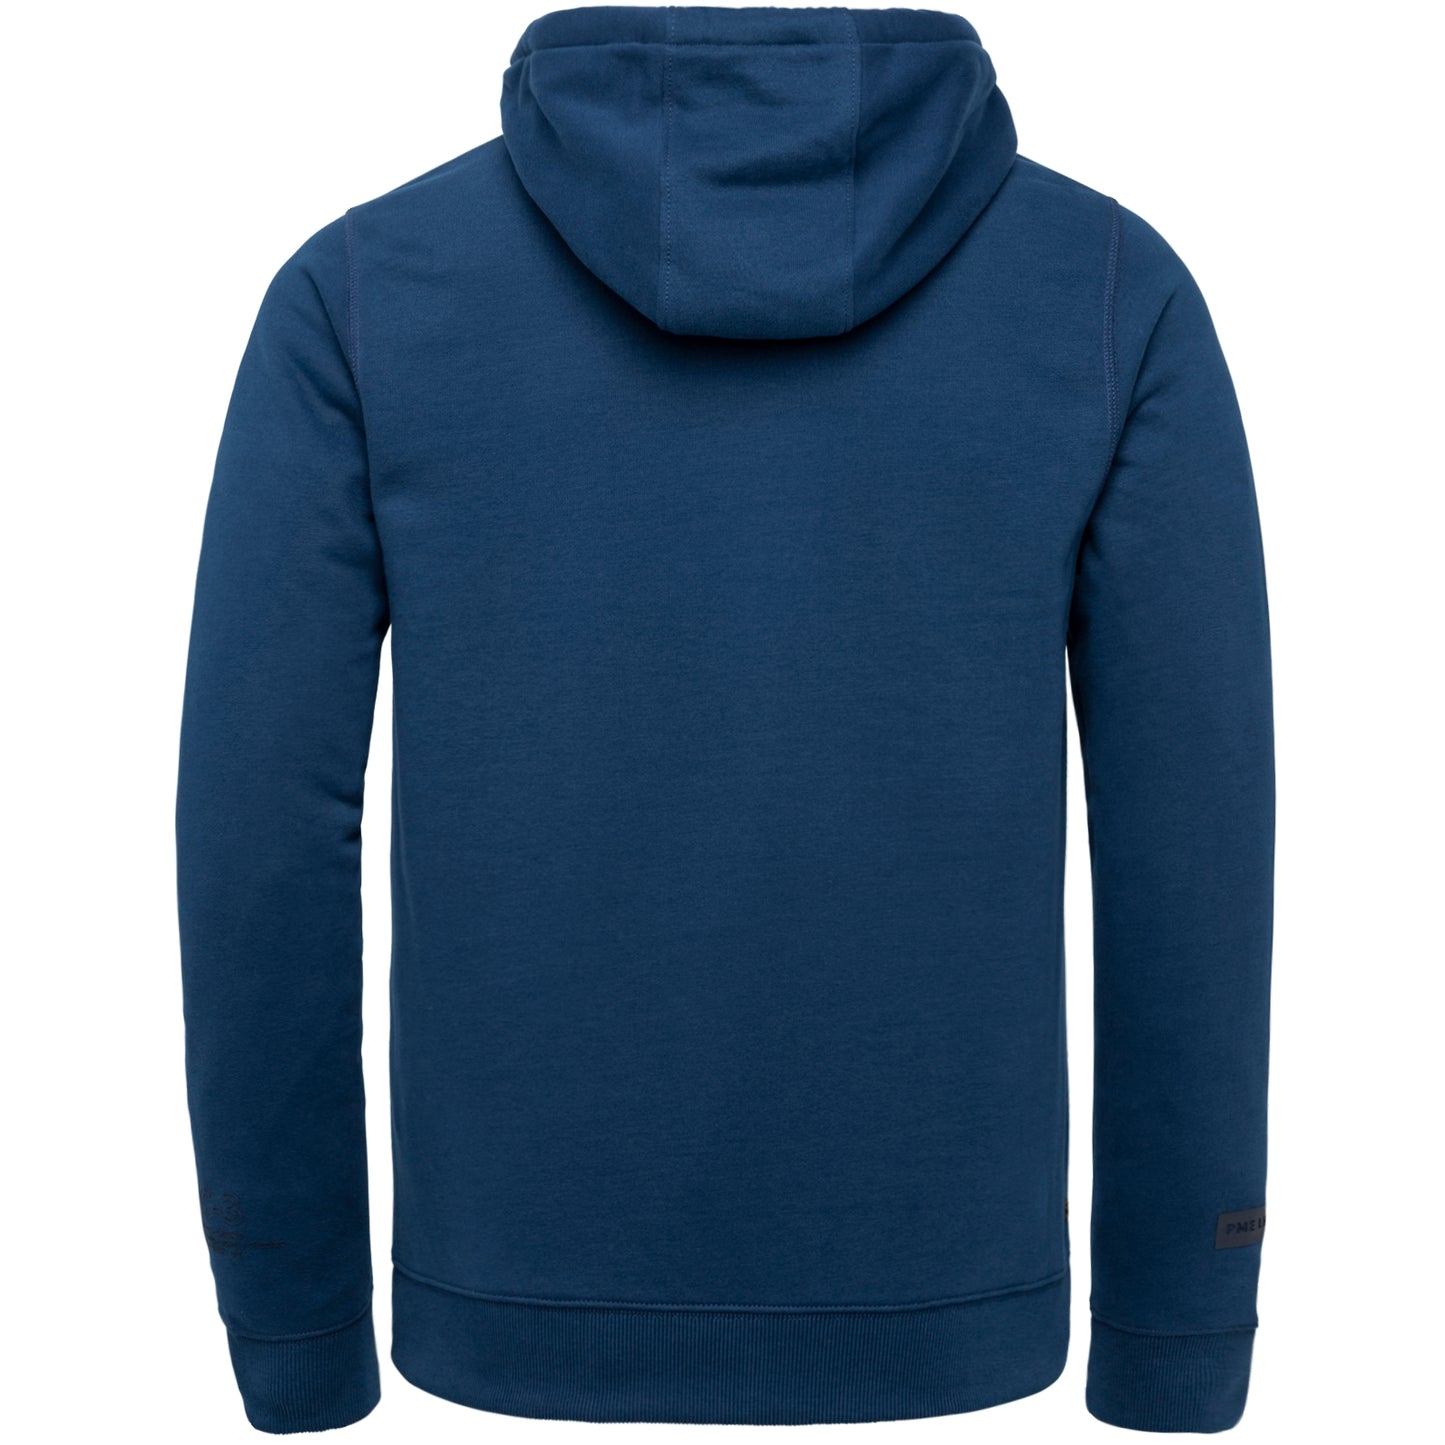 Hooded brushed sweat - PSW215415